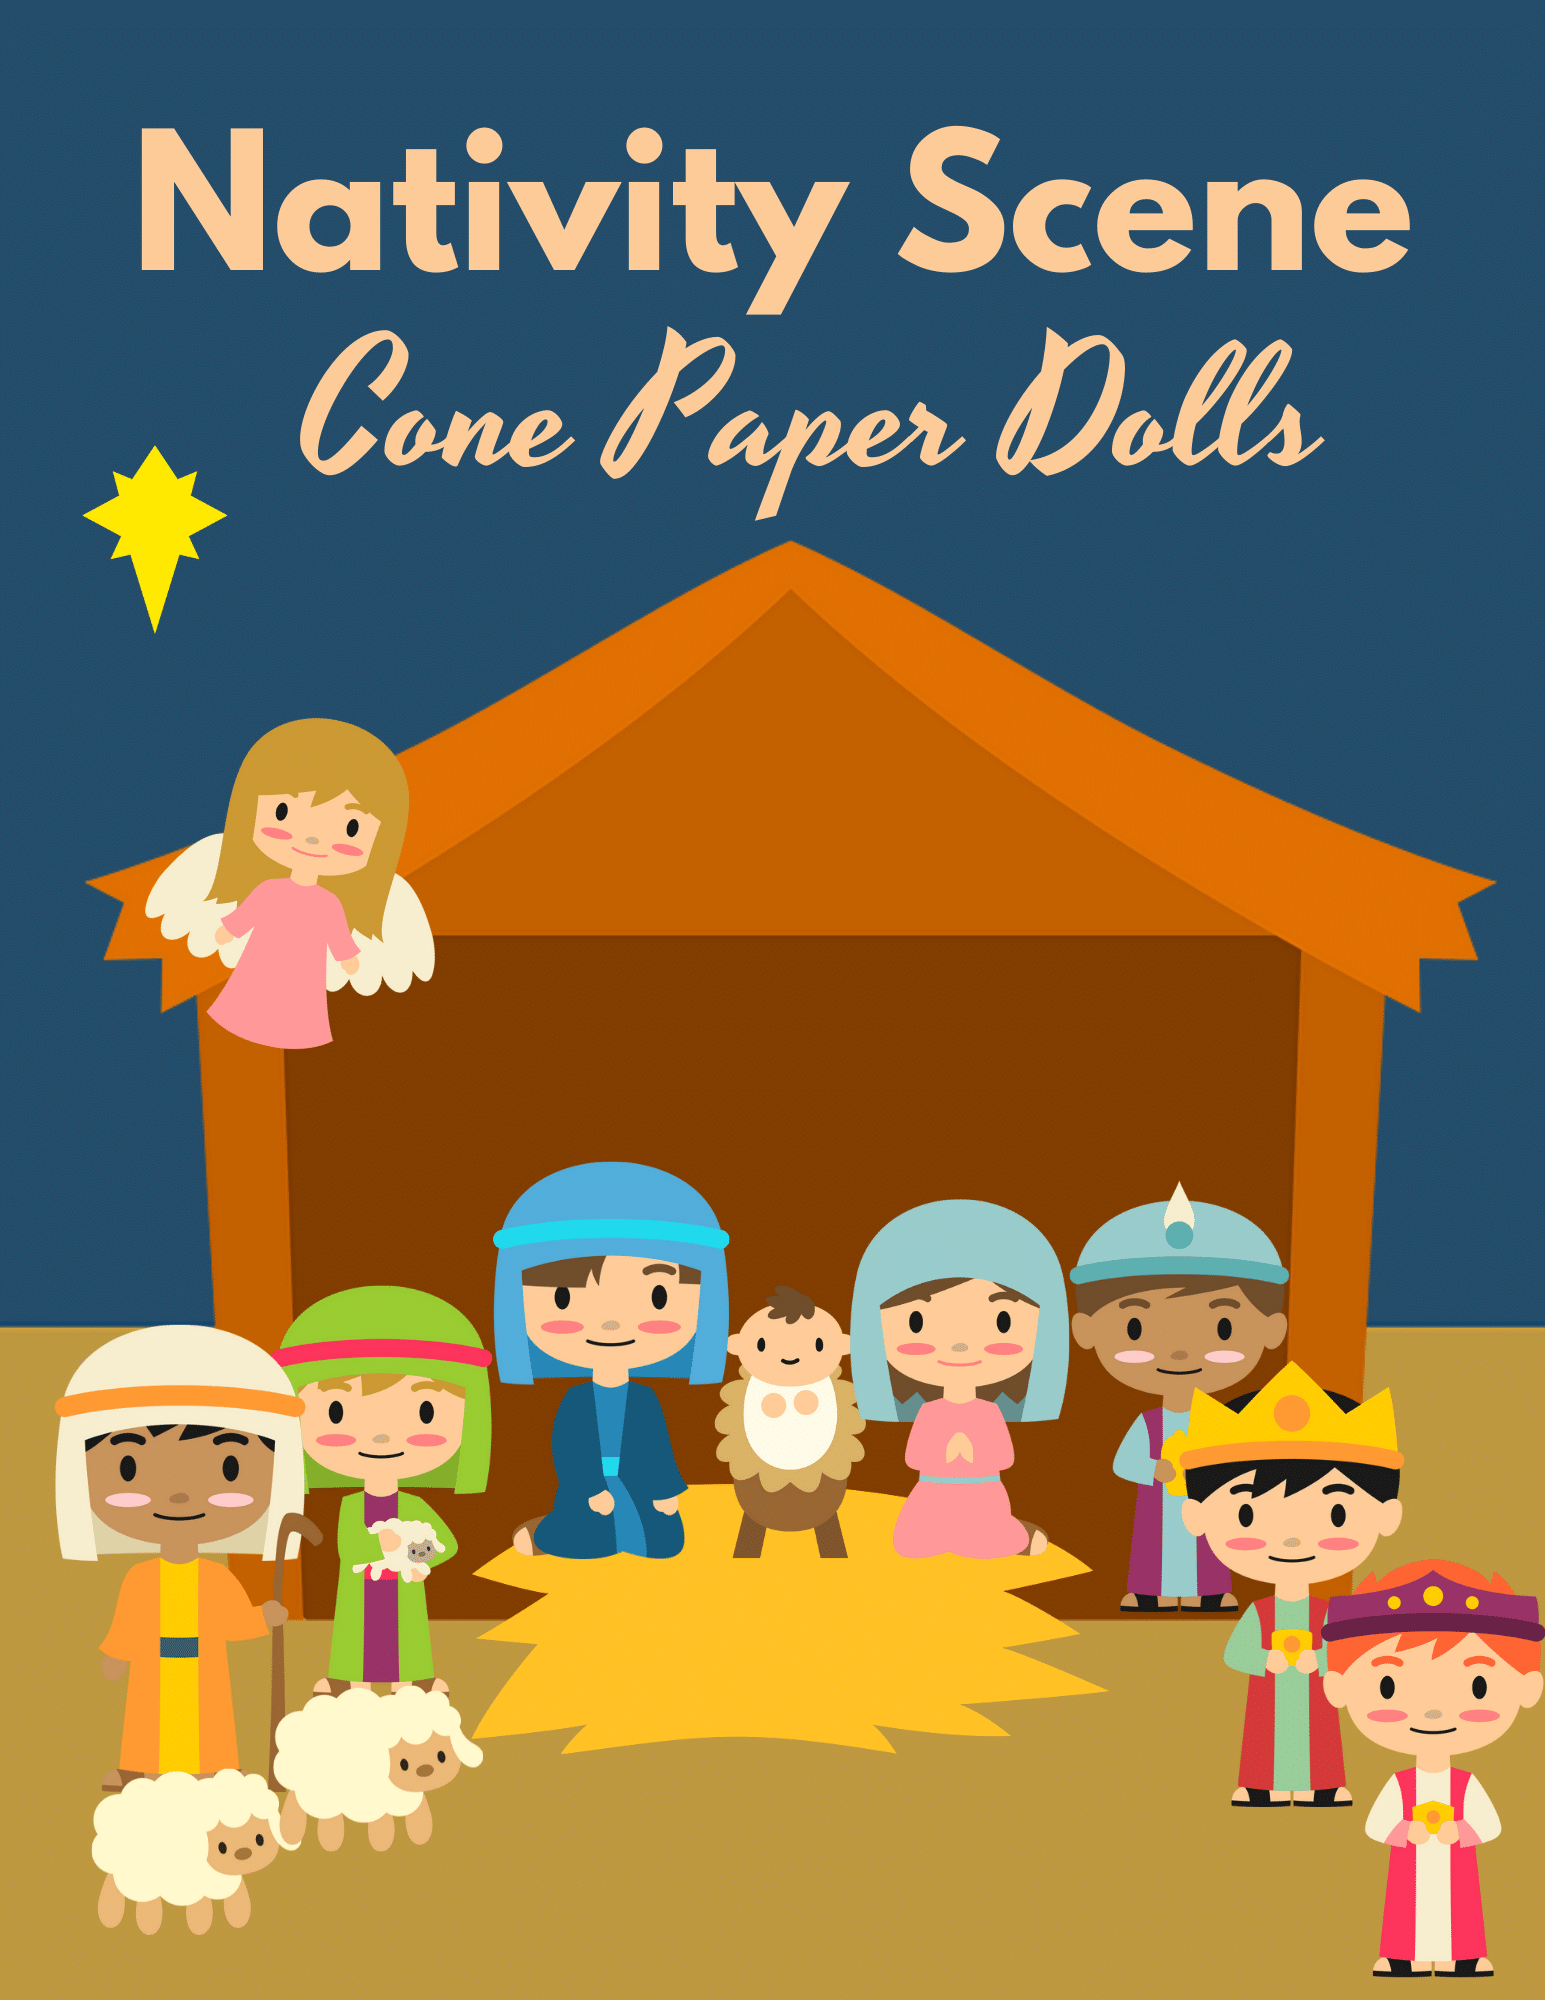 10 Easy to make Nativity scene PRINTABLE PAPER DOLLS for kids of all ages